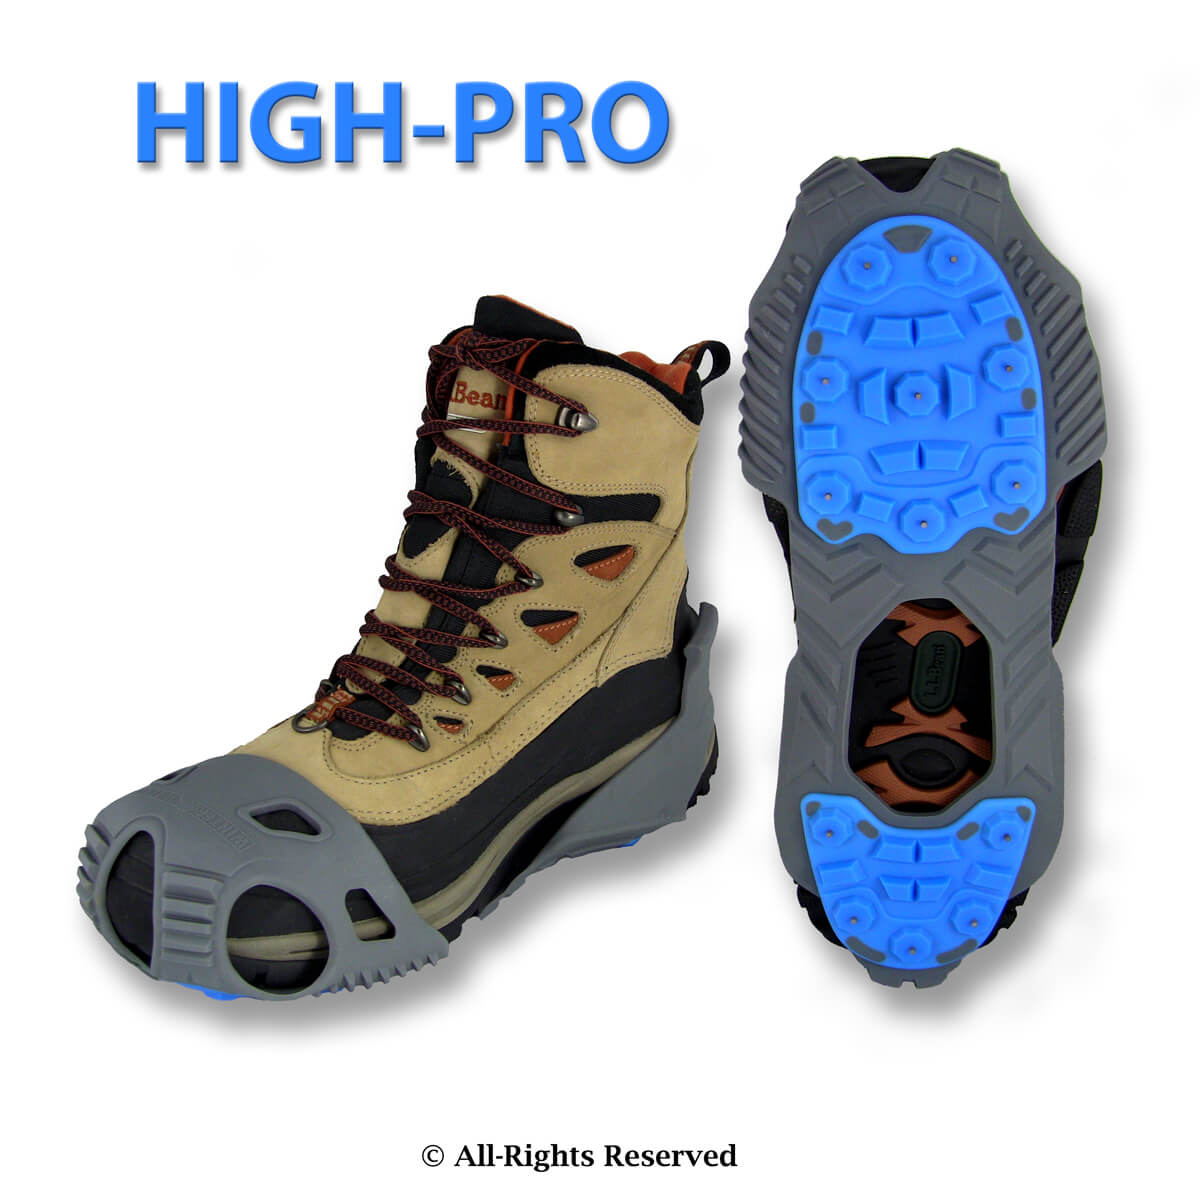 Winter Walking HIGH-PRO Ice Cleats for Shoveling Snow